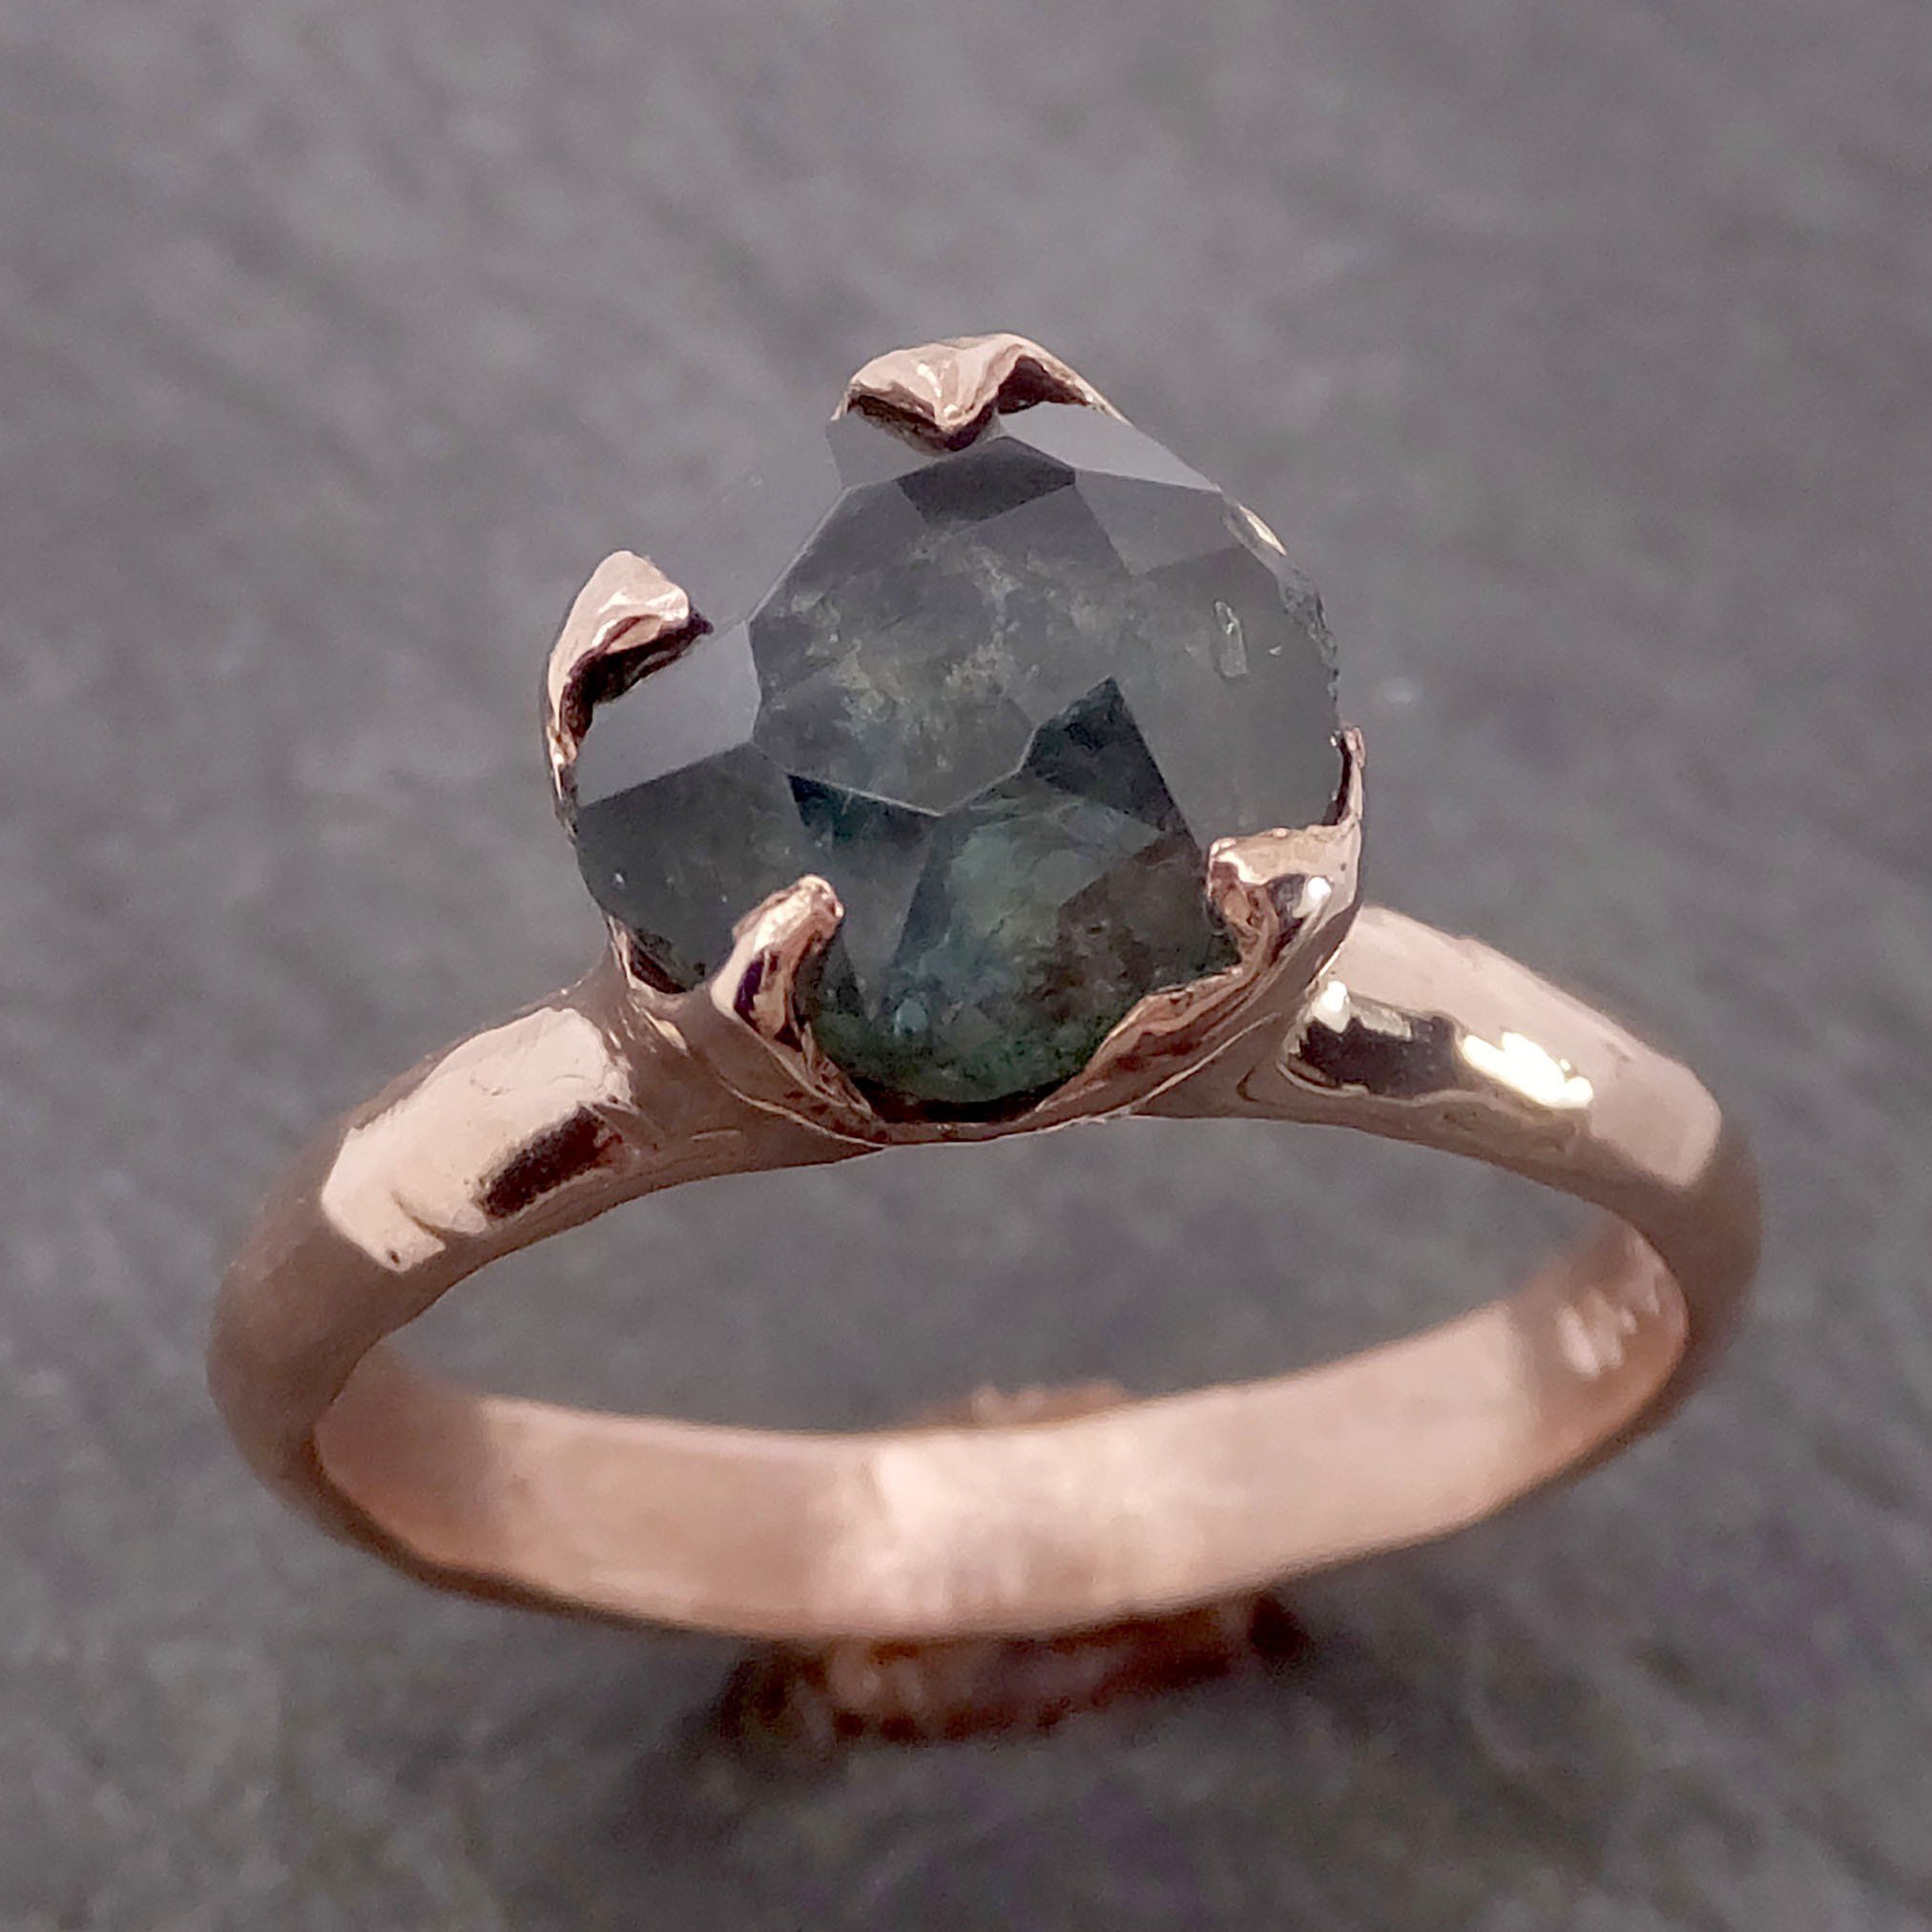 montana sapphire partially faceted solitaire 14k rose gold engagement ring wedding ring custom one of a kind blue gemstone ring c2138 Alternative Engagement